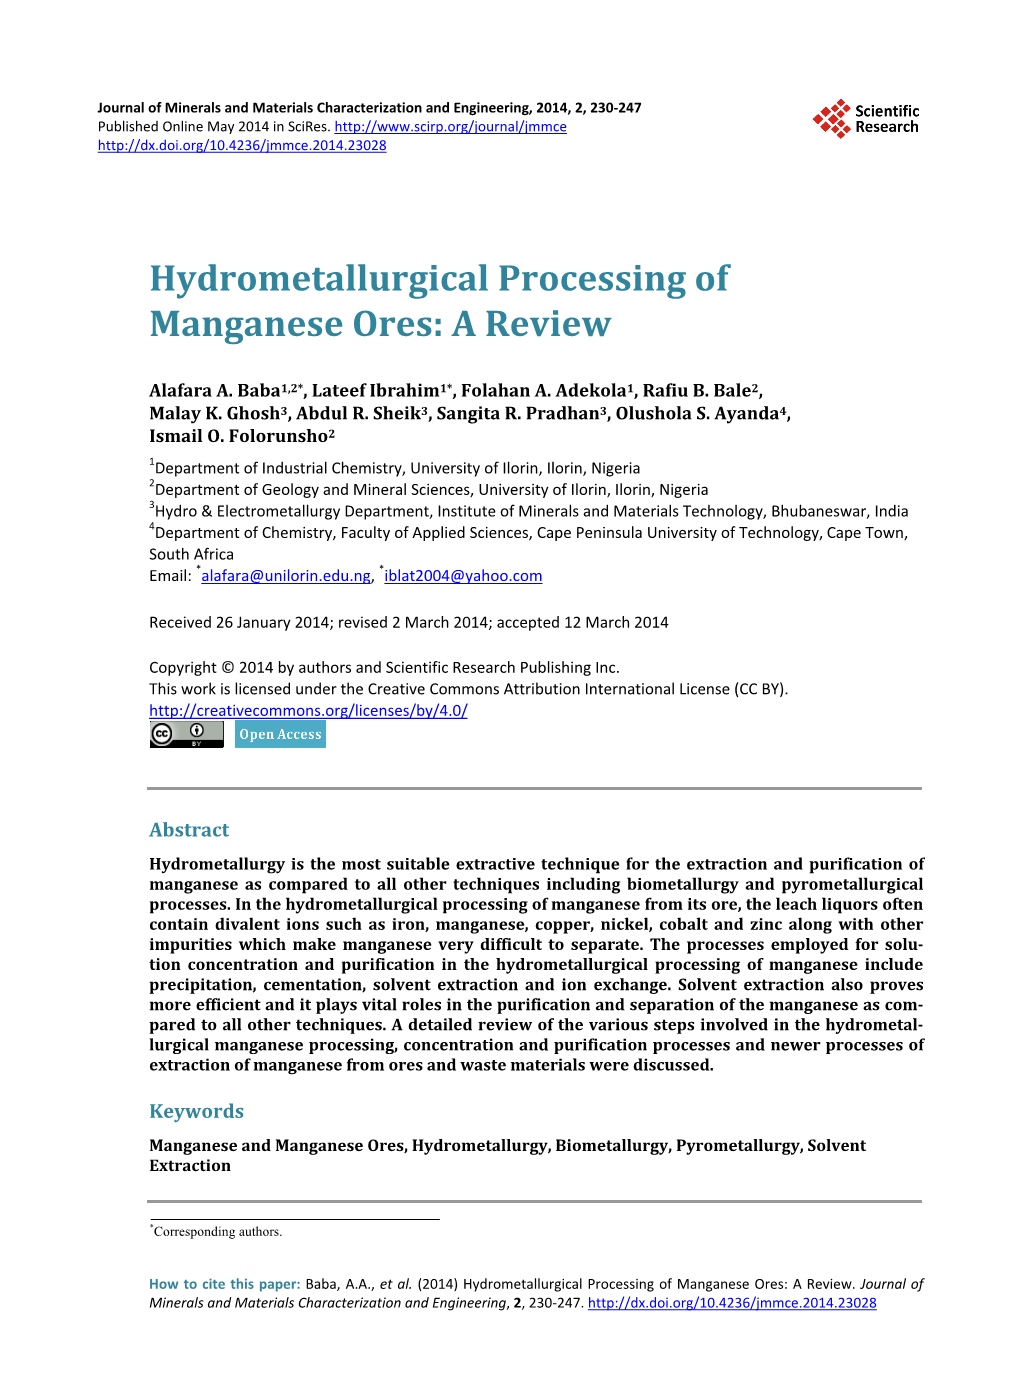 Hydrometallurgical Processing of Manganese Ores: a Review